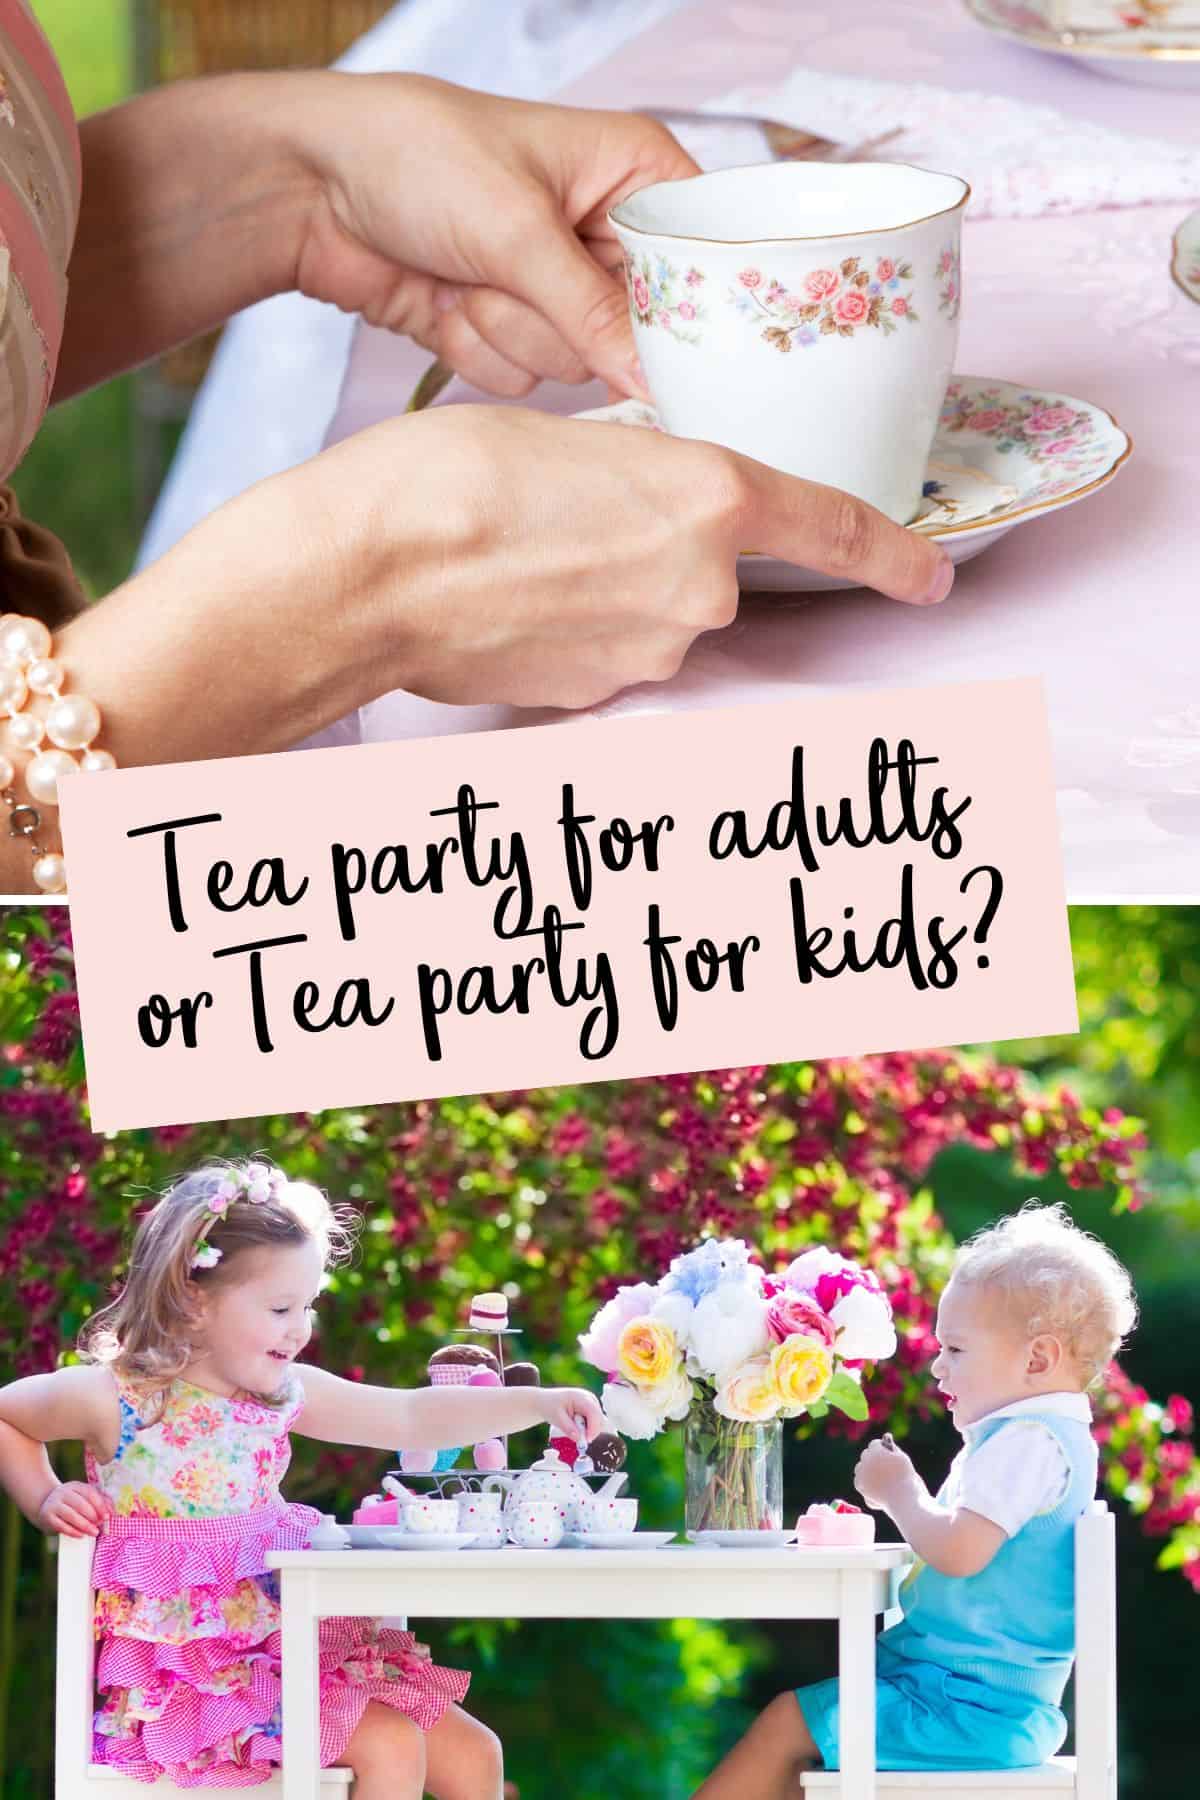 Tea party ideas for adults are different than tea party ideas for kids. Here's why.